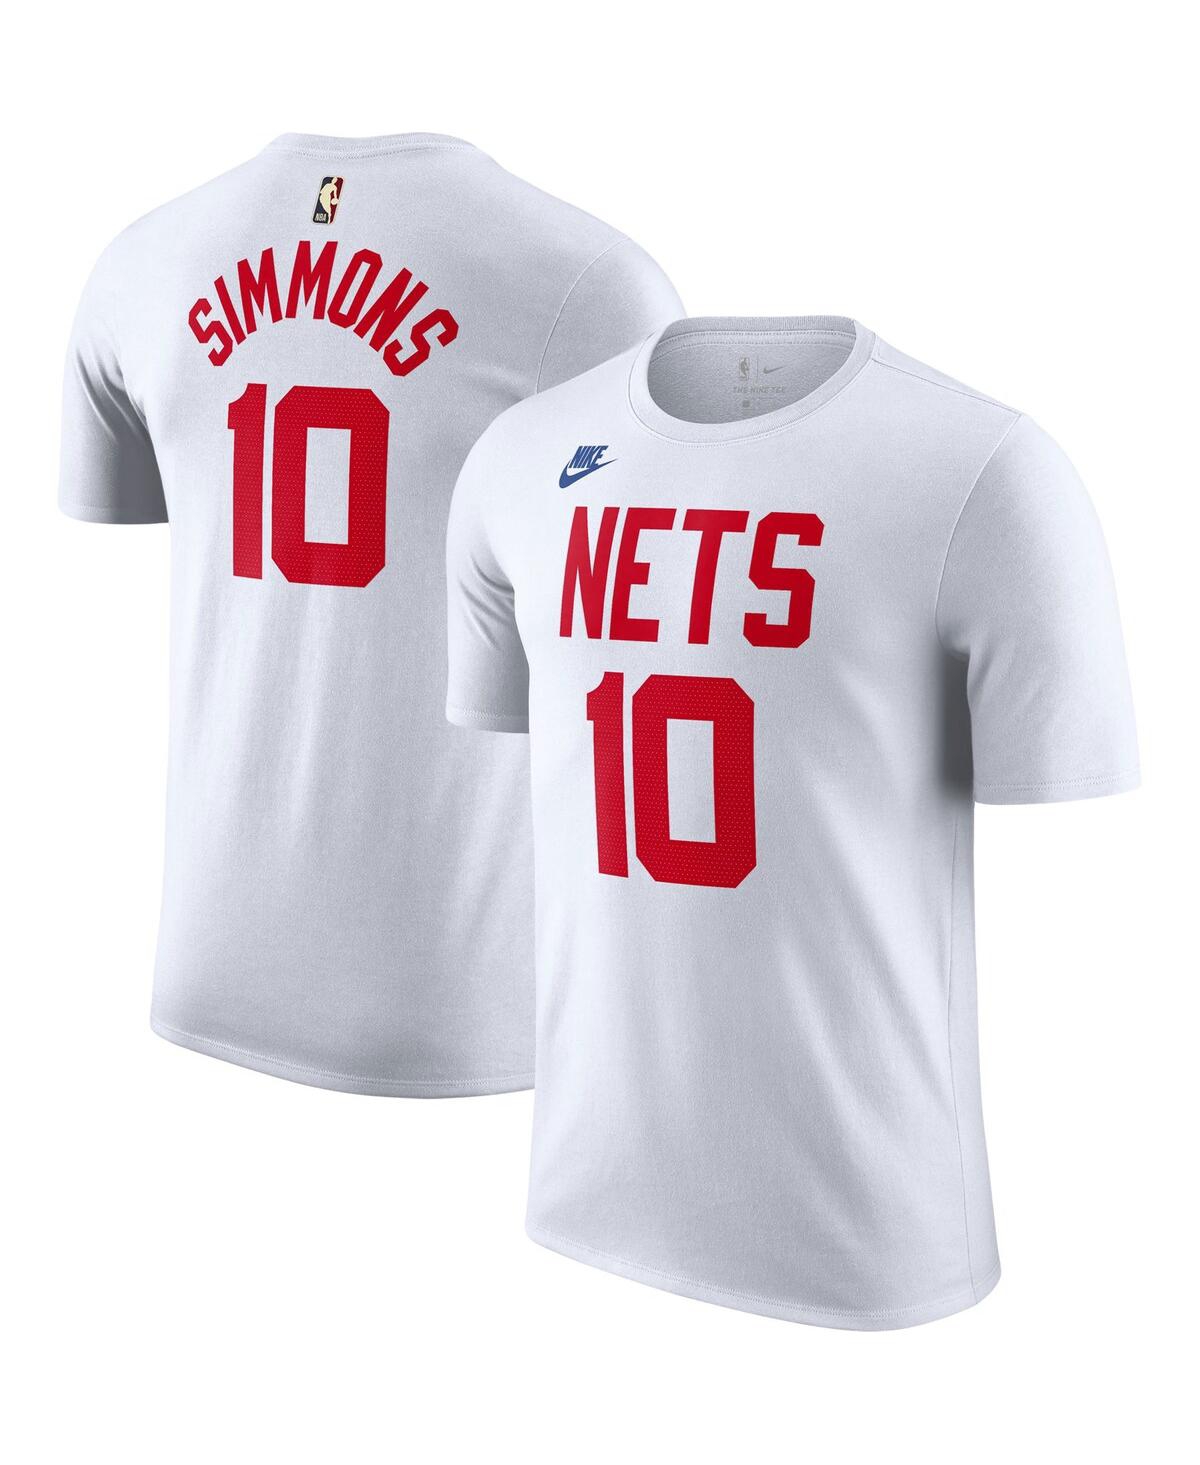 Shop Nike Men's  Ben Simmons White Brooklyn Nets 2022/23 Classic Edition Name And Number T-shirt